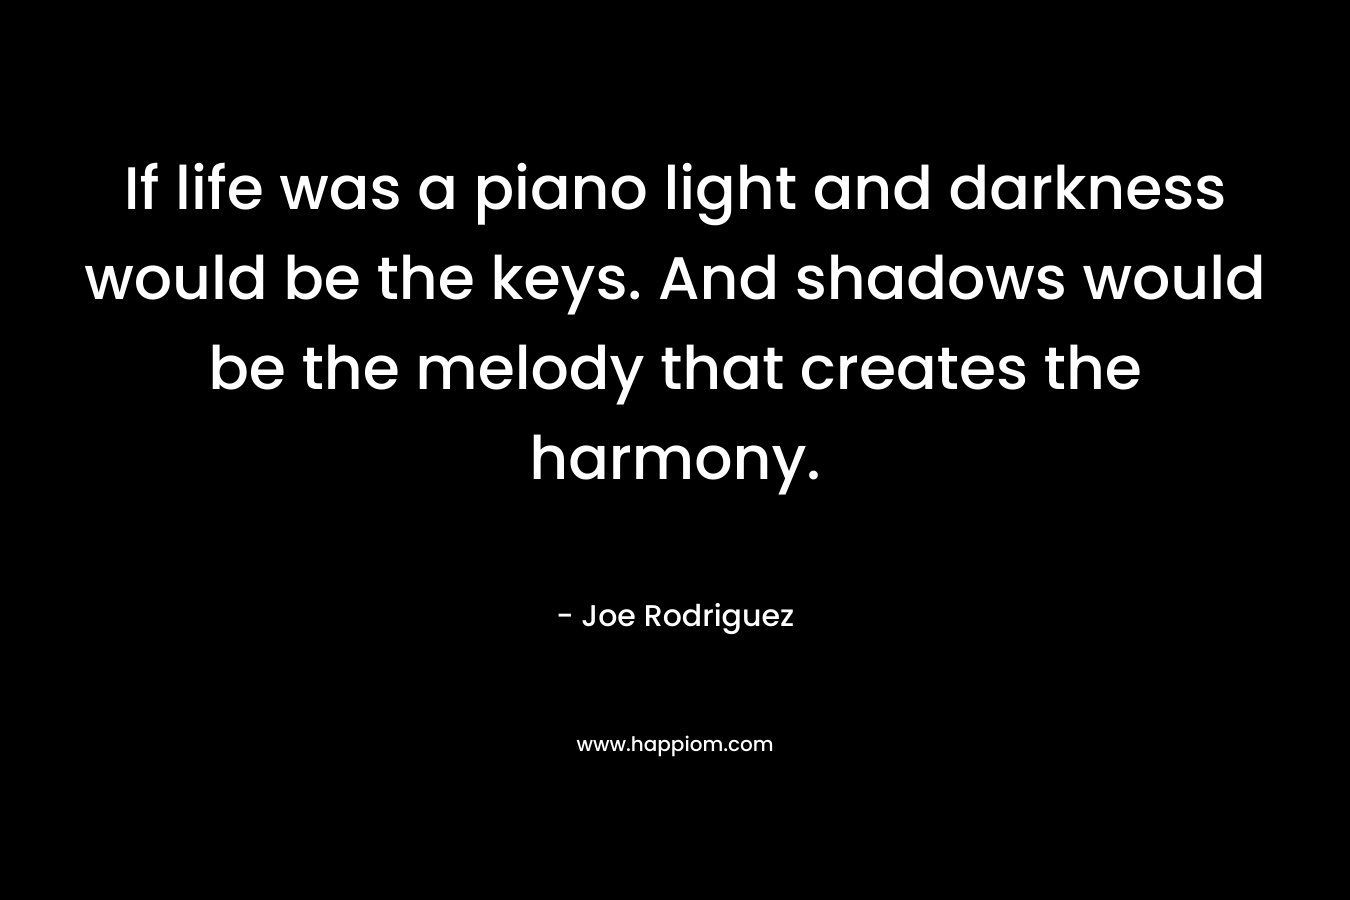 If life was a piano light and darkness would be the keys. And shadows would be the melody that creates the harmony. – Joe Rodriguez